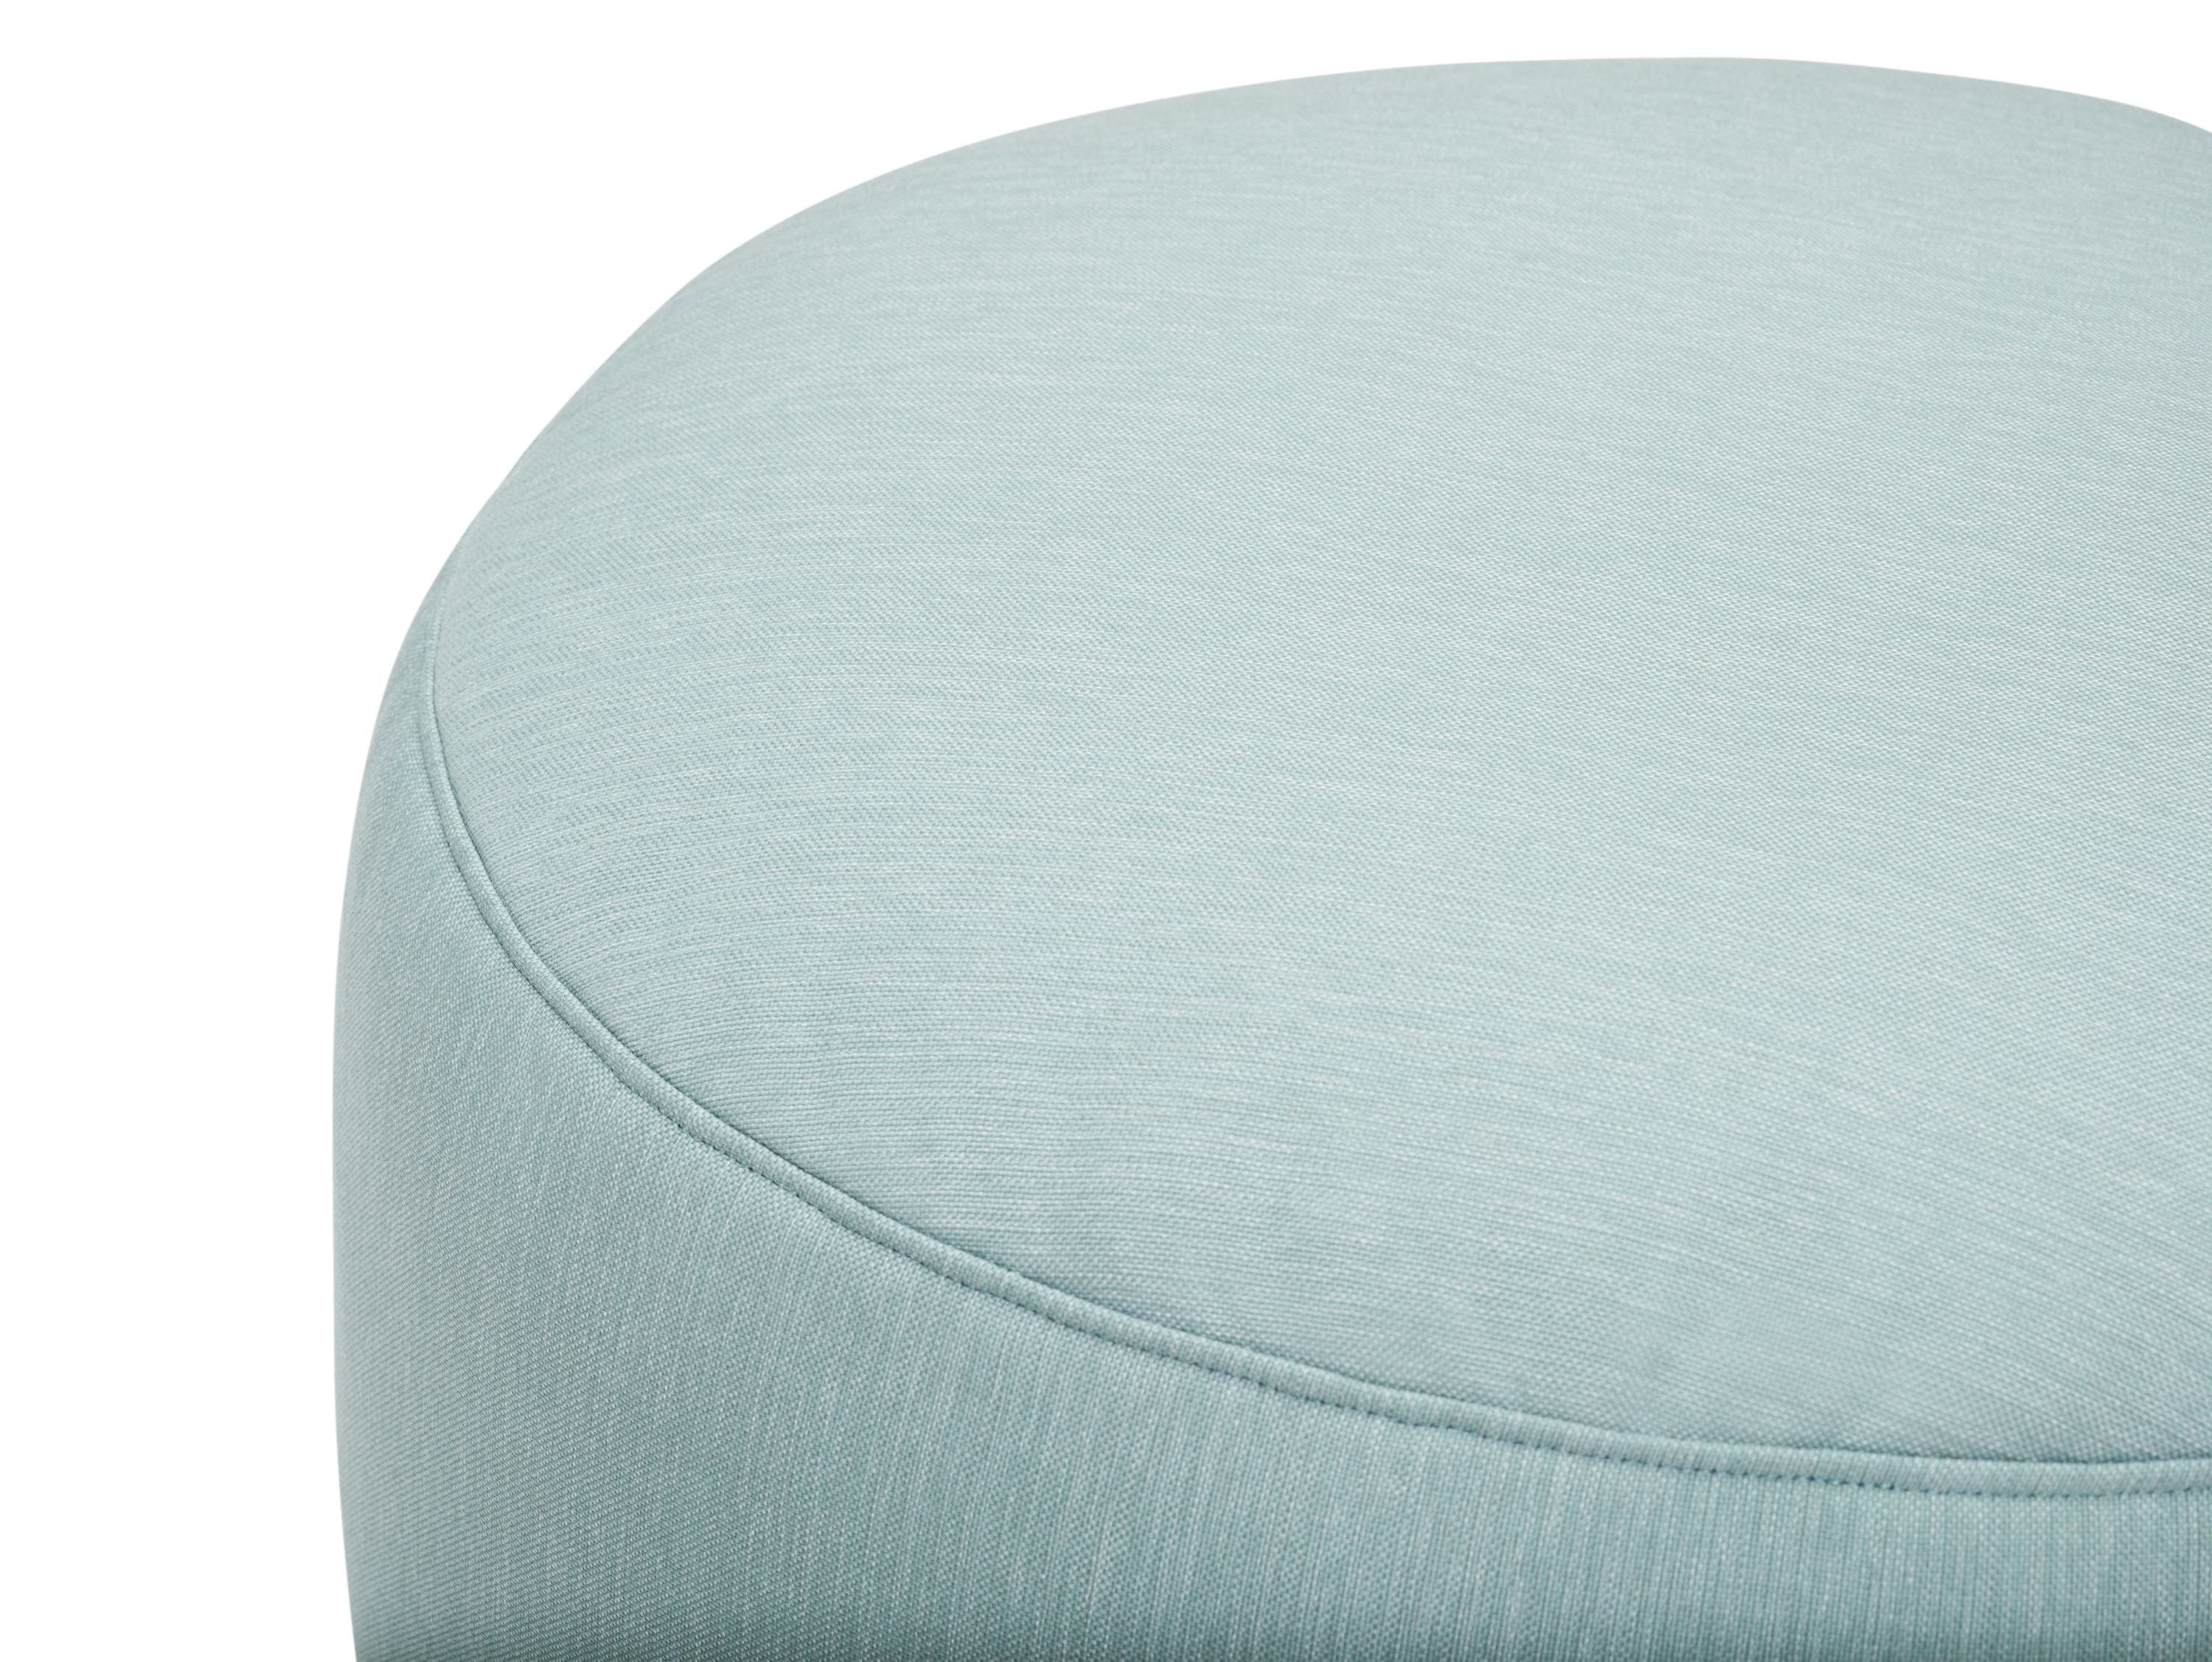 Fatboy Point Outdoor Large Stool, Seafoam